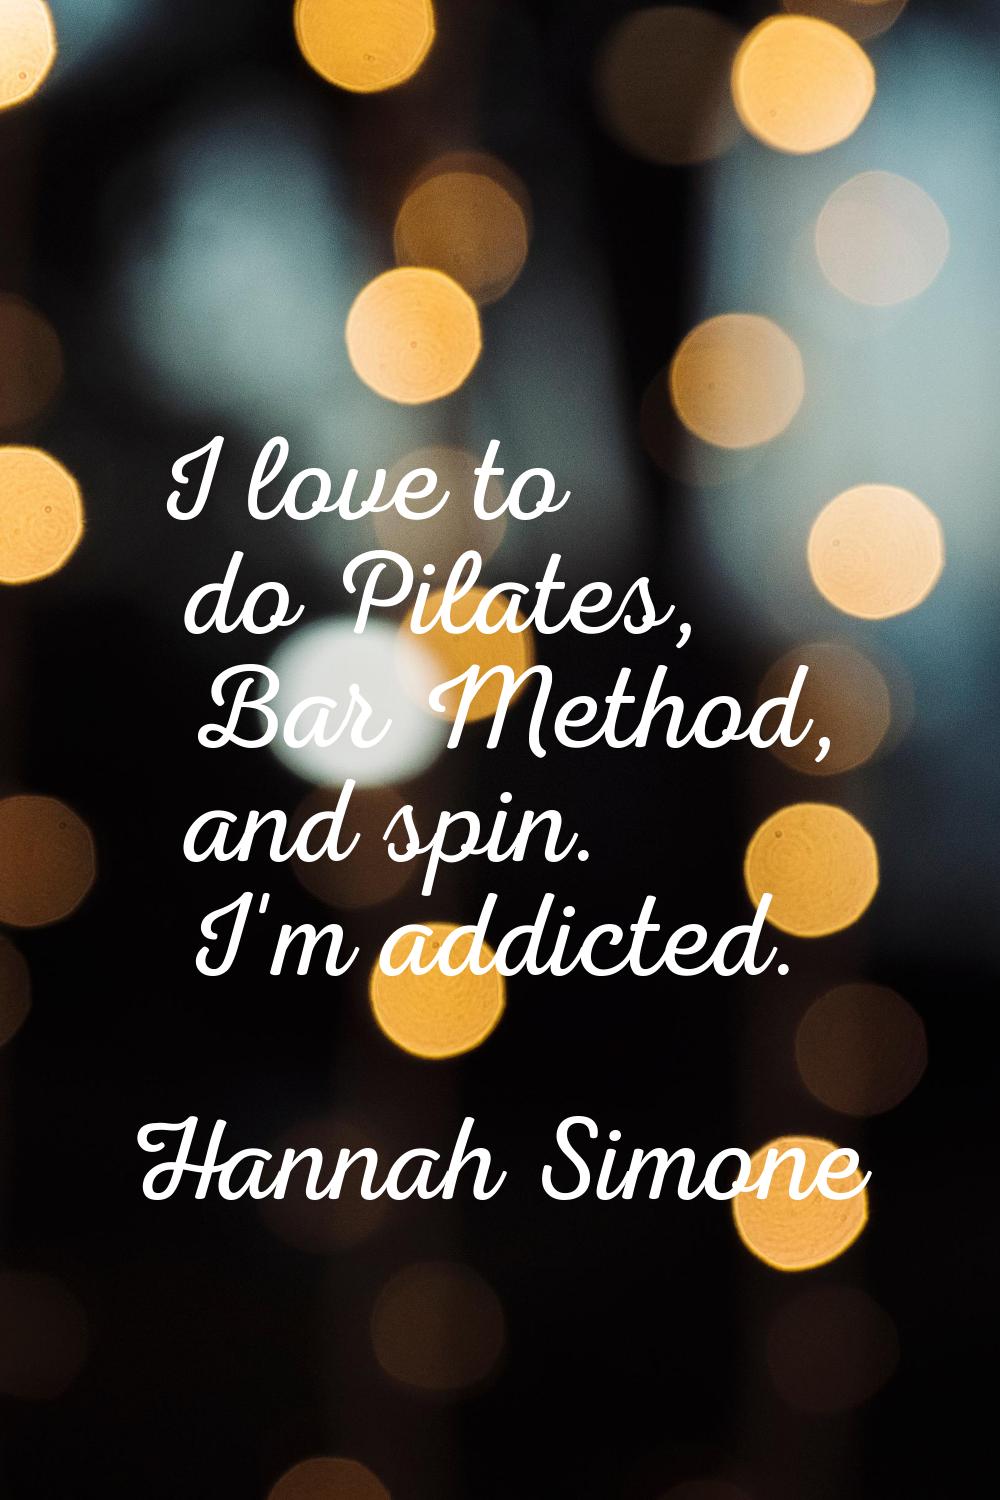 I love to do Pilates, Bar Method, and spin. I'm addicted.